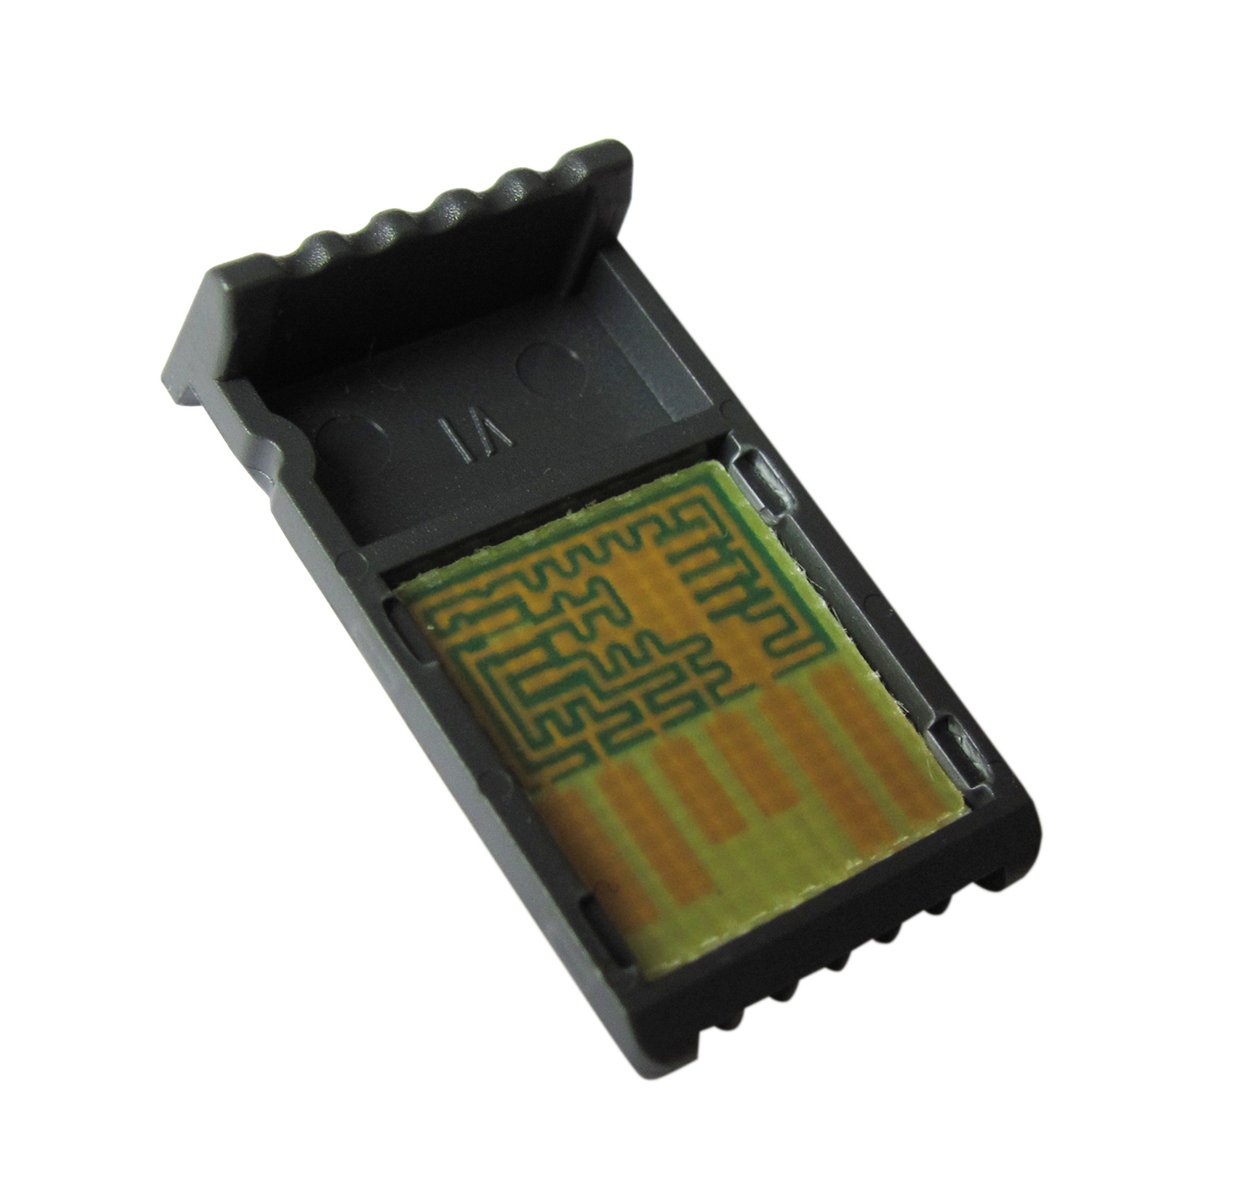 a close up view of a small, black, plastic device